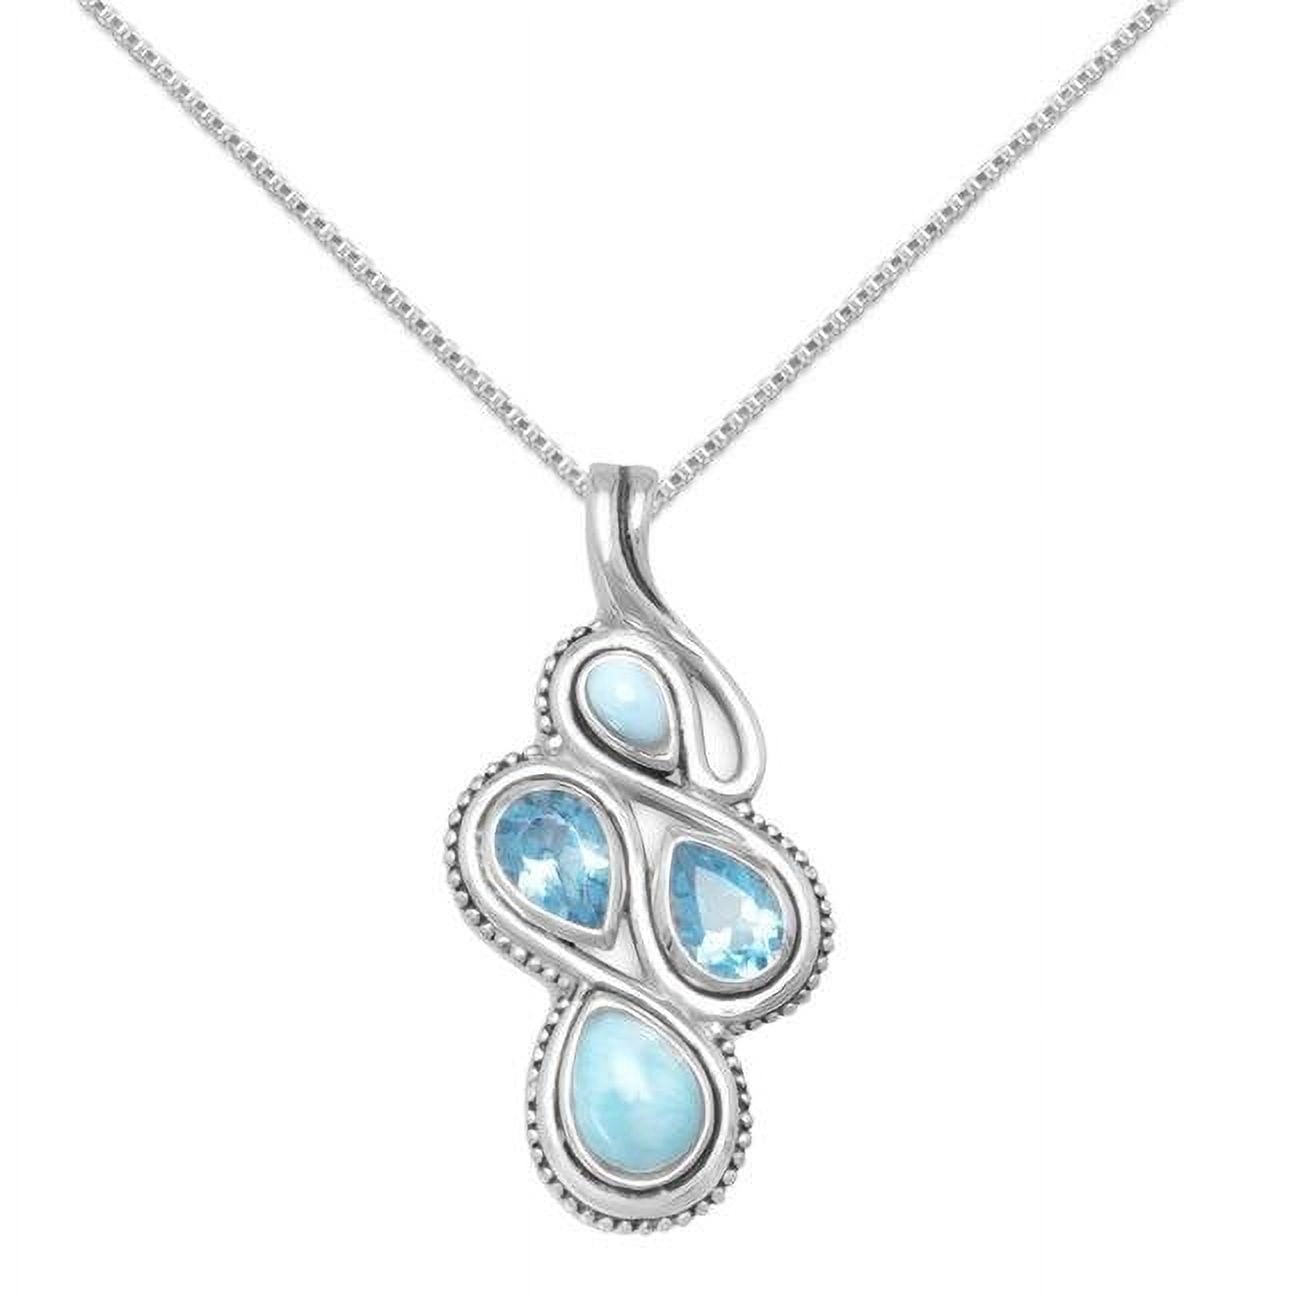 74279-20 20 In. Oxidized Sterling Silver Blue Topaz & Larimar Figure 8 Slide Pendant With 1.5 Mm Box Chain